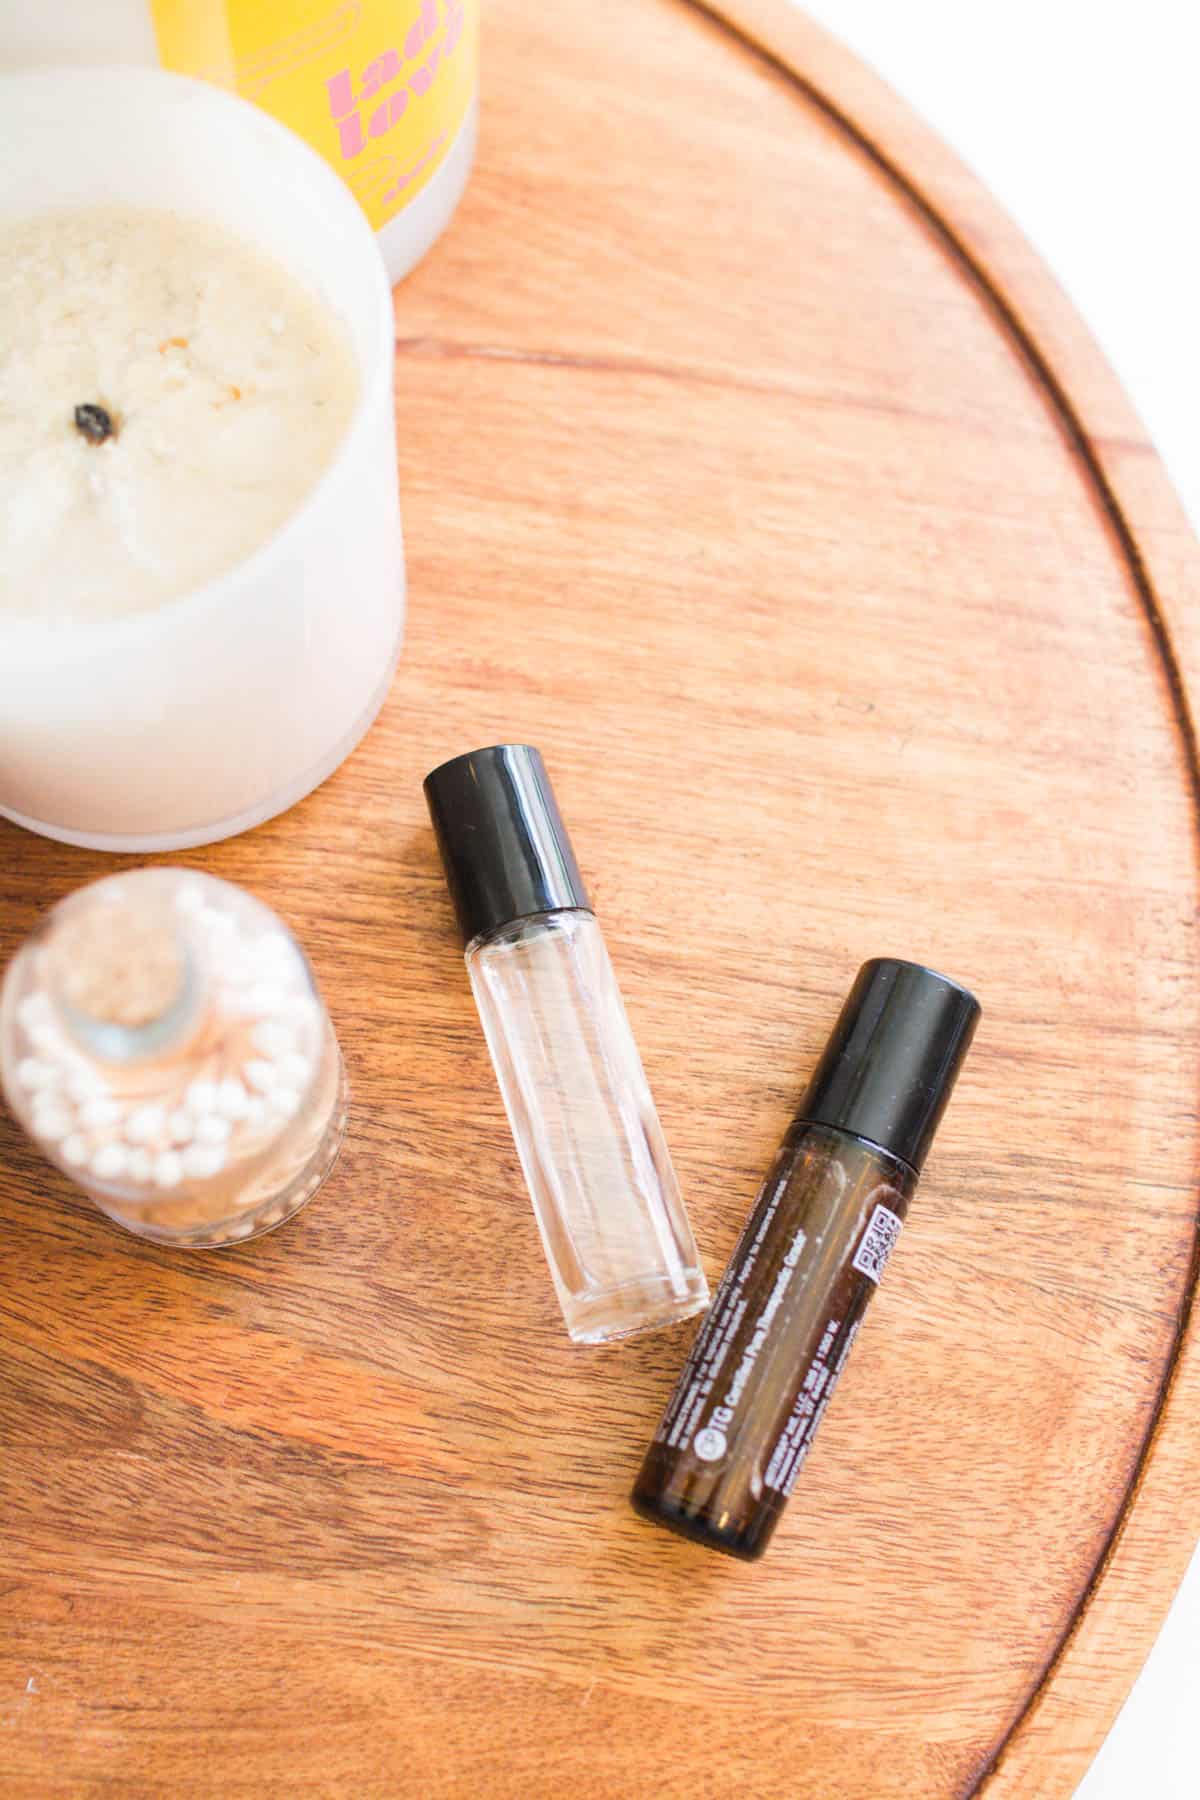 Two glass roller-ball bottles with essential oils on a tray on a table.